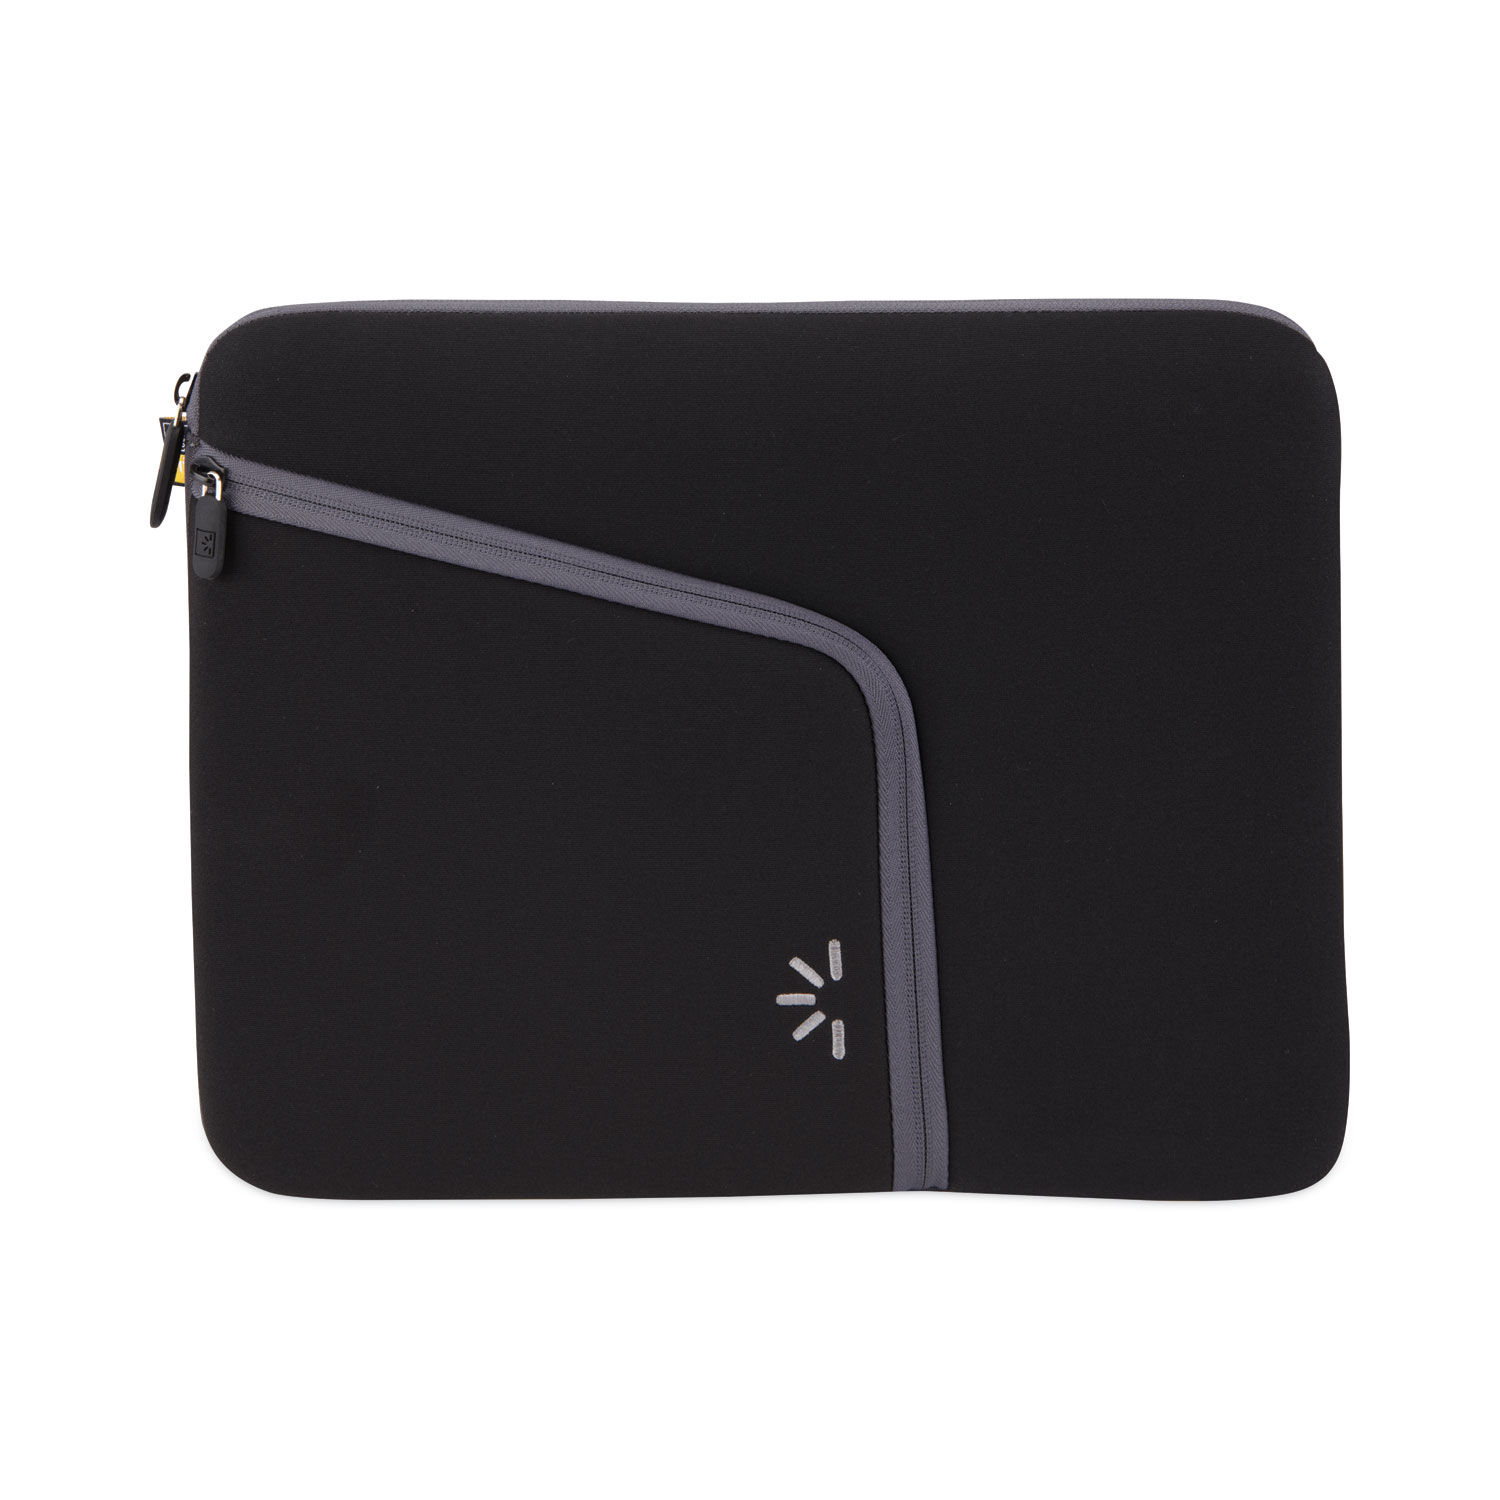 Roo 13.3" Laptop Sleeve Fits Devices Up to 13.3", Neoprene, 13.5 x 1.75 x 10.25, Black